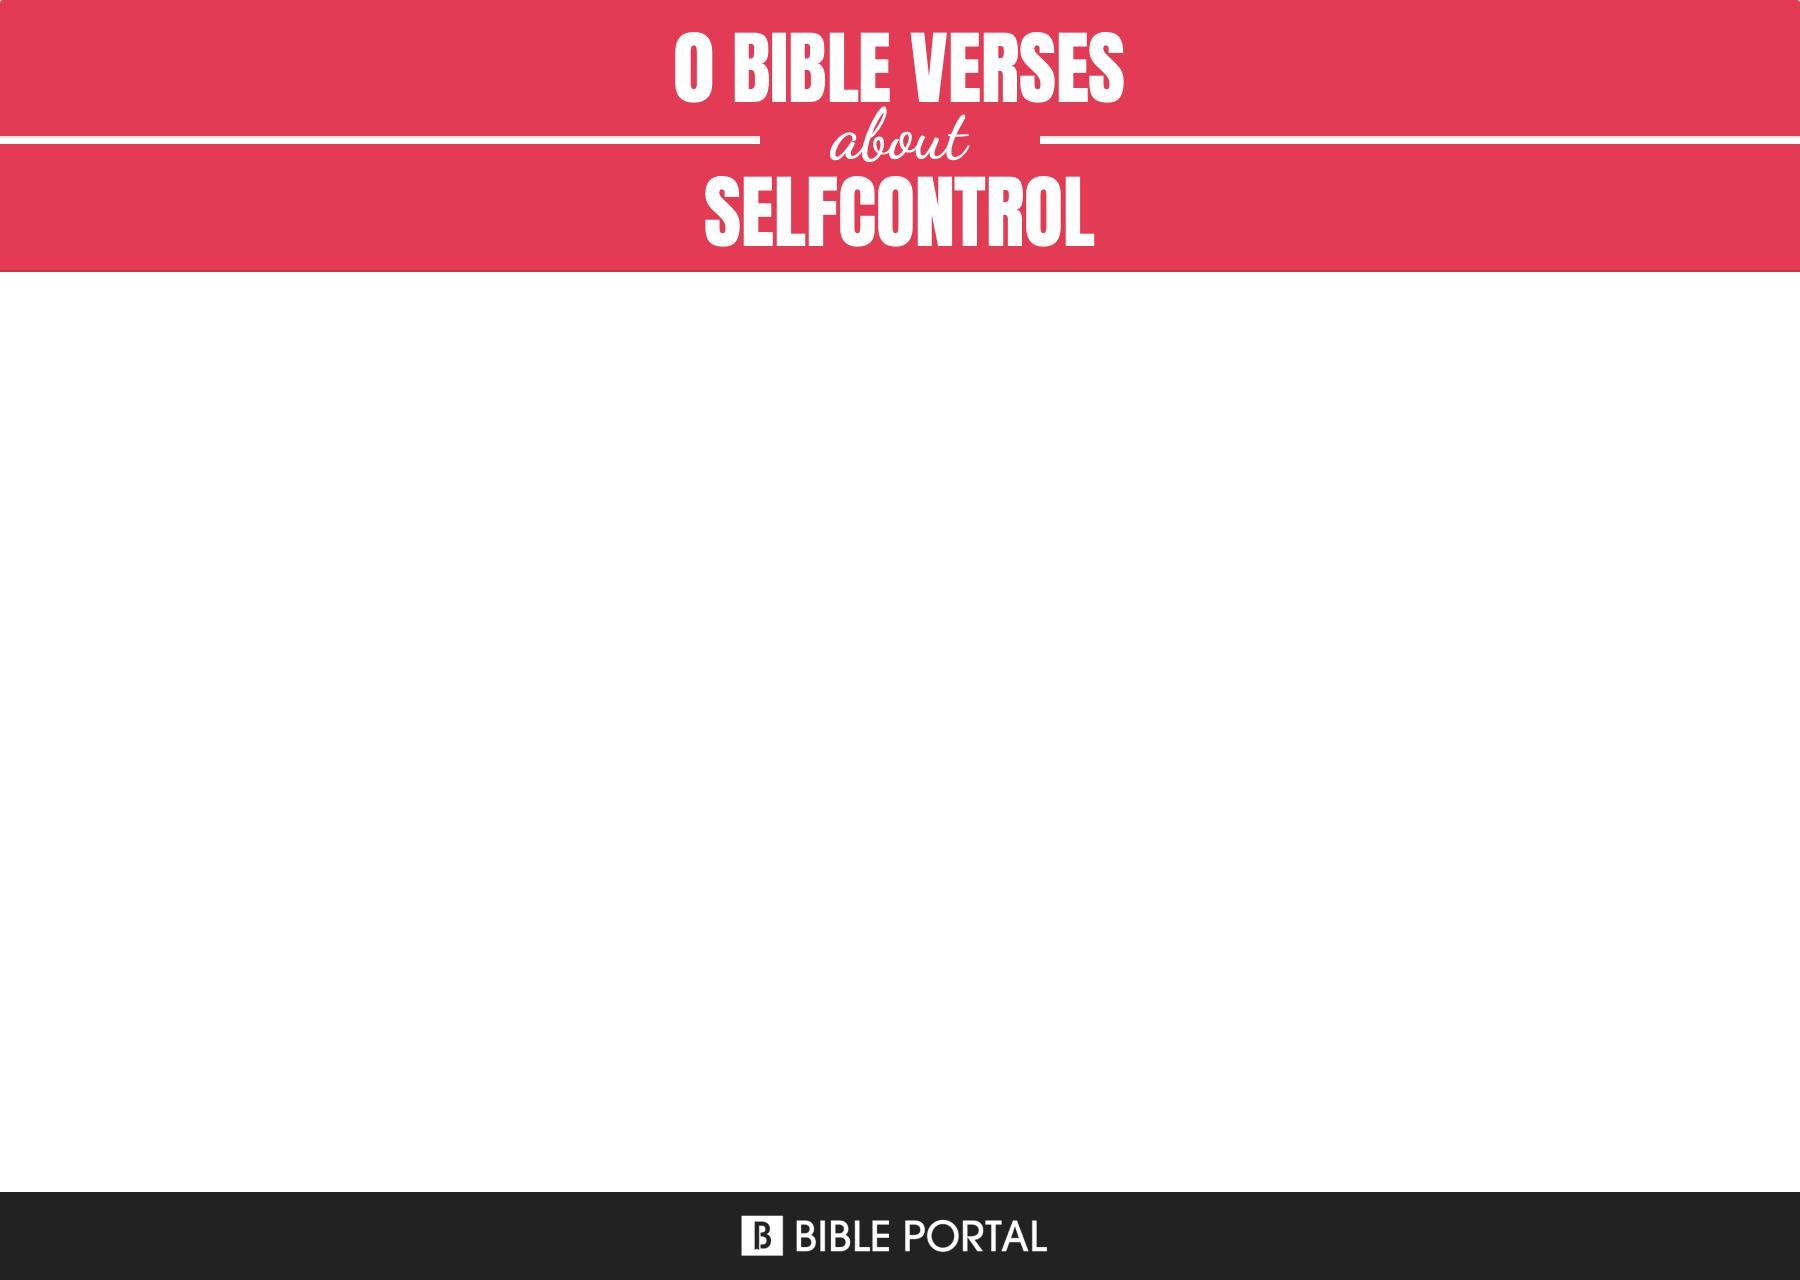 What Does the Bible Say about Self-control?